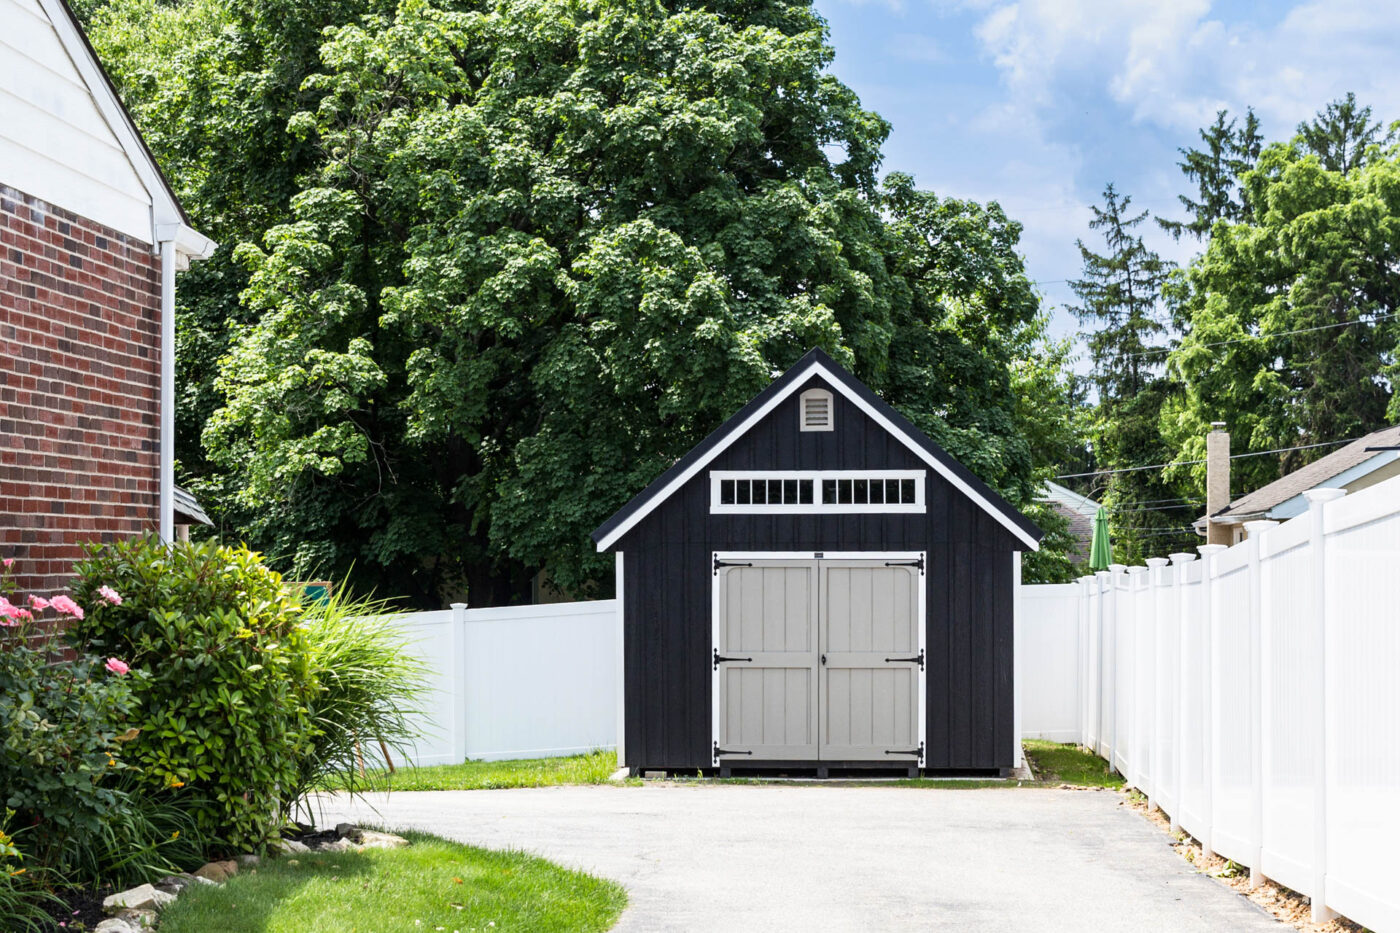 Black workshop shed with white trim for sale in Providence, RI